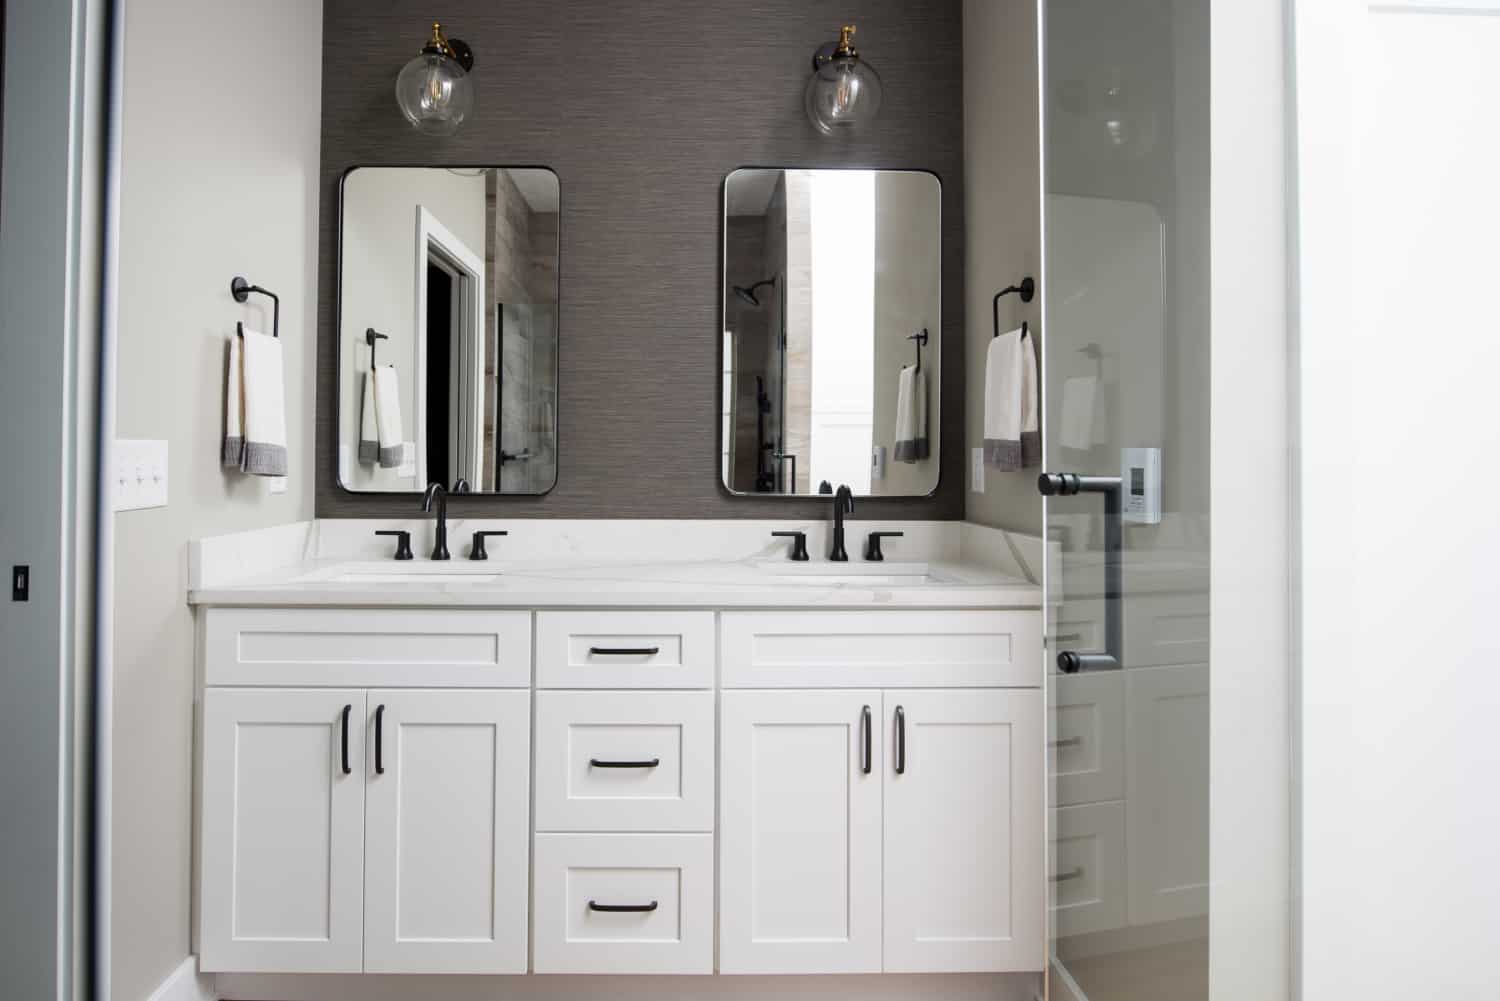 Nicholas Design Build | A modern white bathroom with two sinks and mirrors.